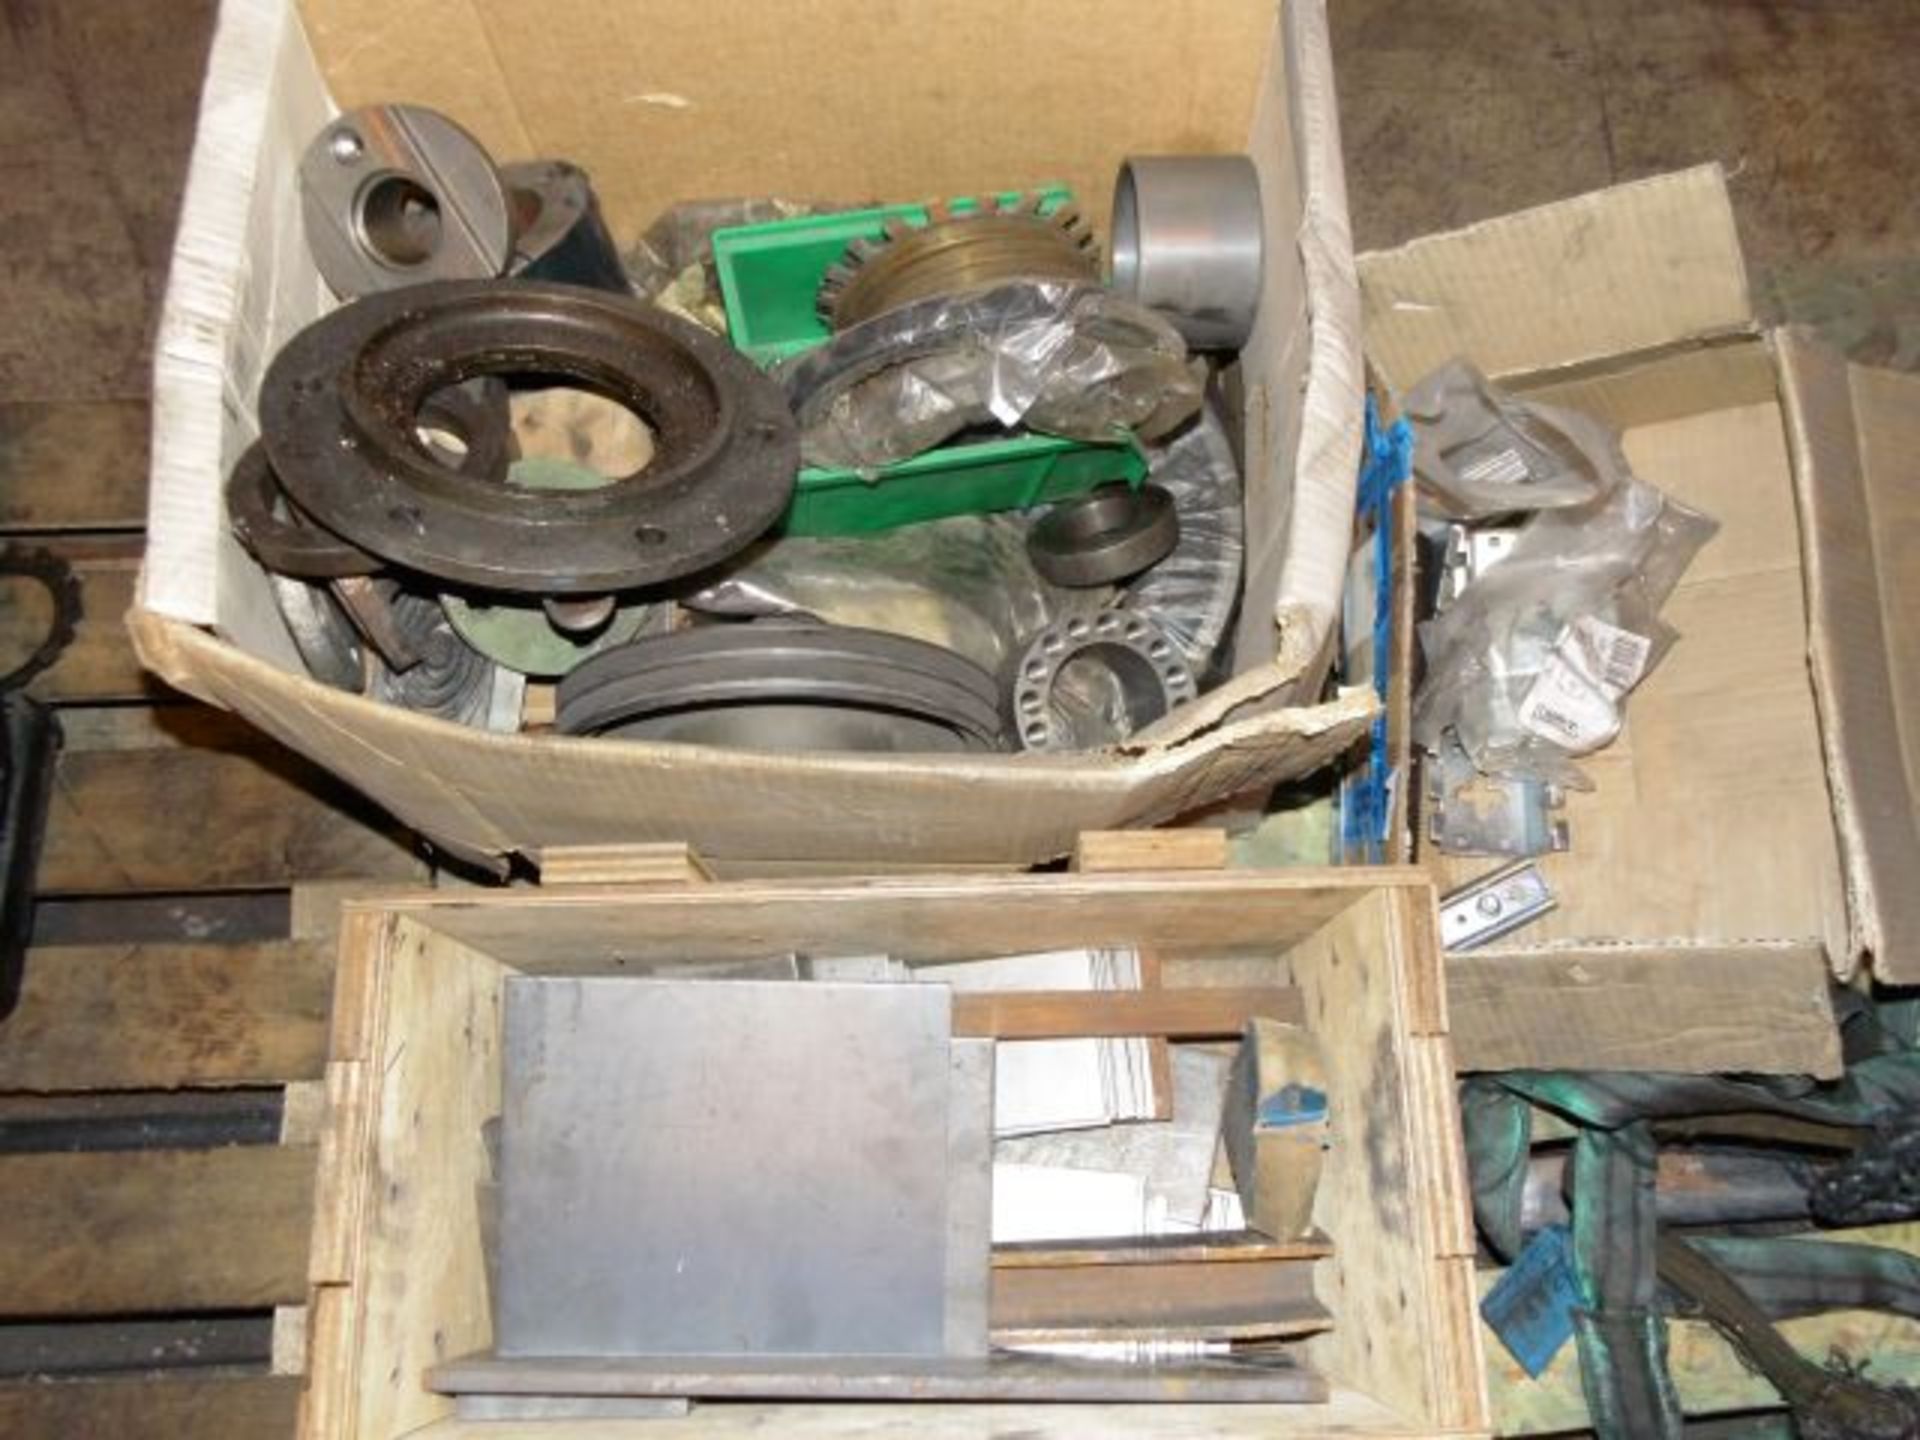 * Pallet of assorted Spares including Flanges, Cuplings, Plates etc. Loaded onto Buyer's Transport